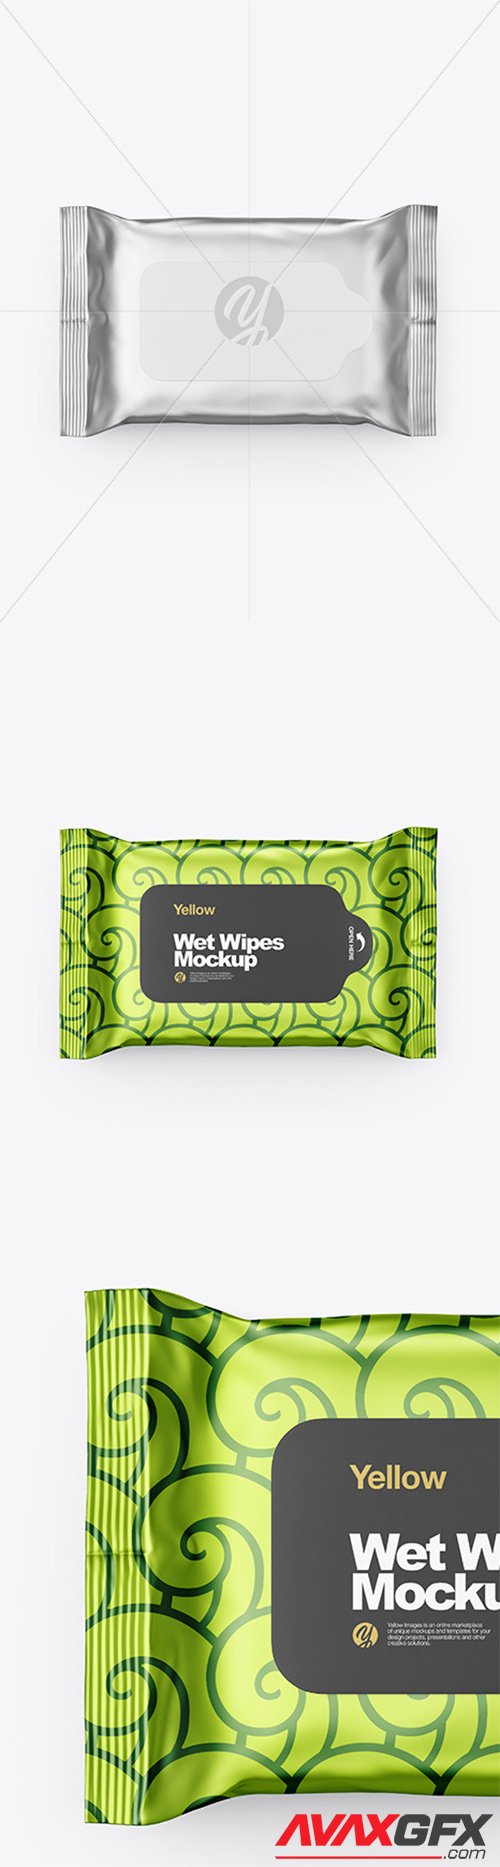 Download Metallic Wet Wipes Pack Mockup Top View 61616 Avaxgfx All Downloads That You Need In One Place Graphic From Nitroflare Rapidgator PSD Mockup Templates